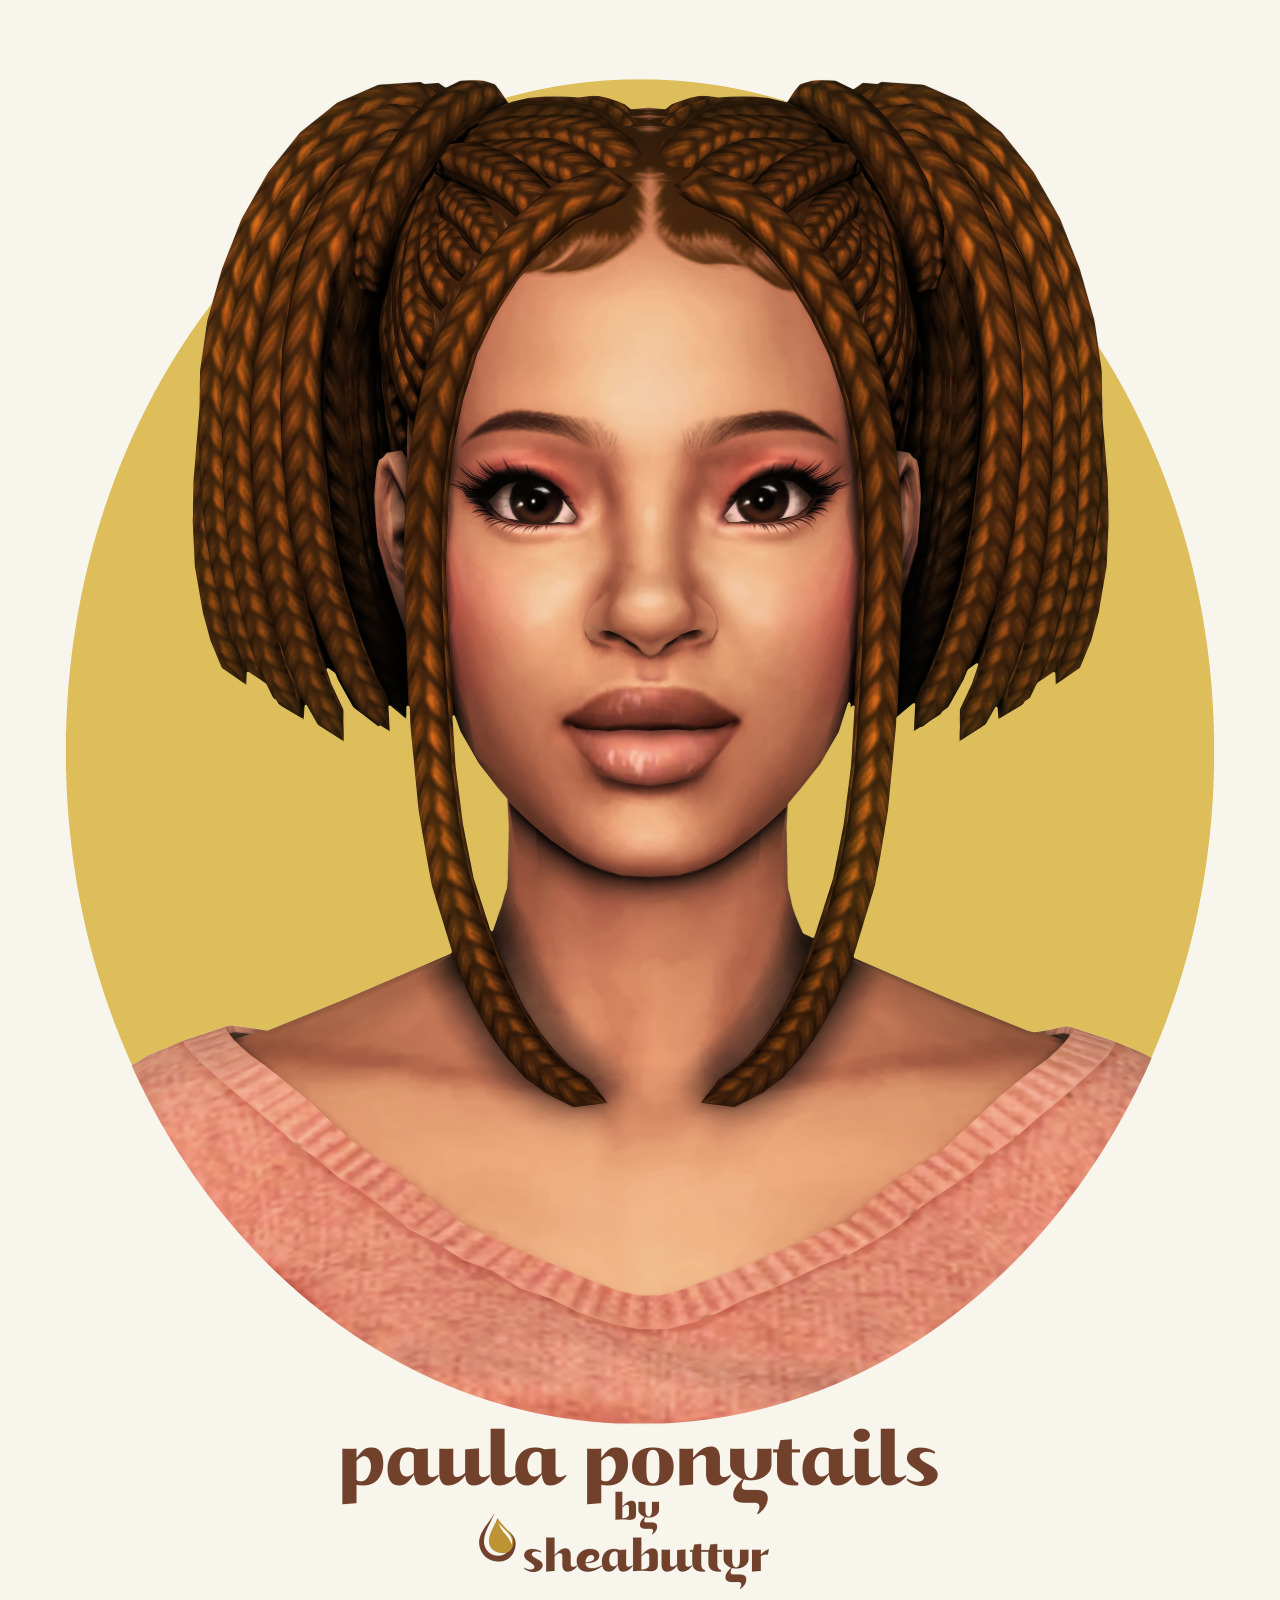 paula ponytailsBGC • Not Hat Compatible • Maxis 24 swatches + 7 Mod Max swatches • Don’t re-upload/claim as your own Vertices: 12614 Polygons: 21544 download: patreon